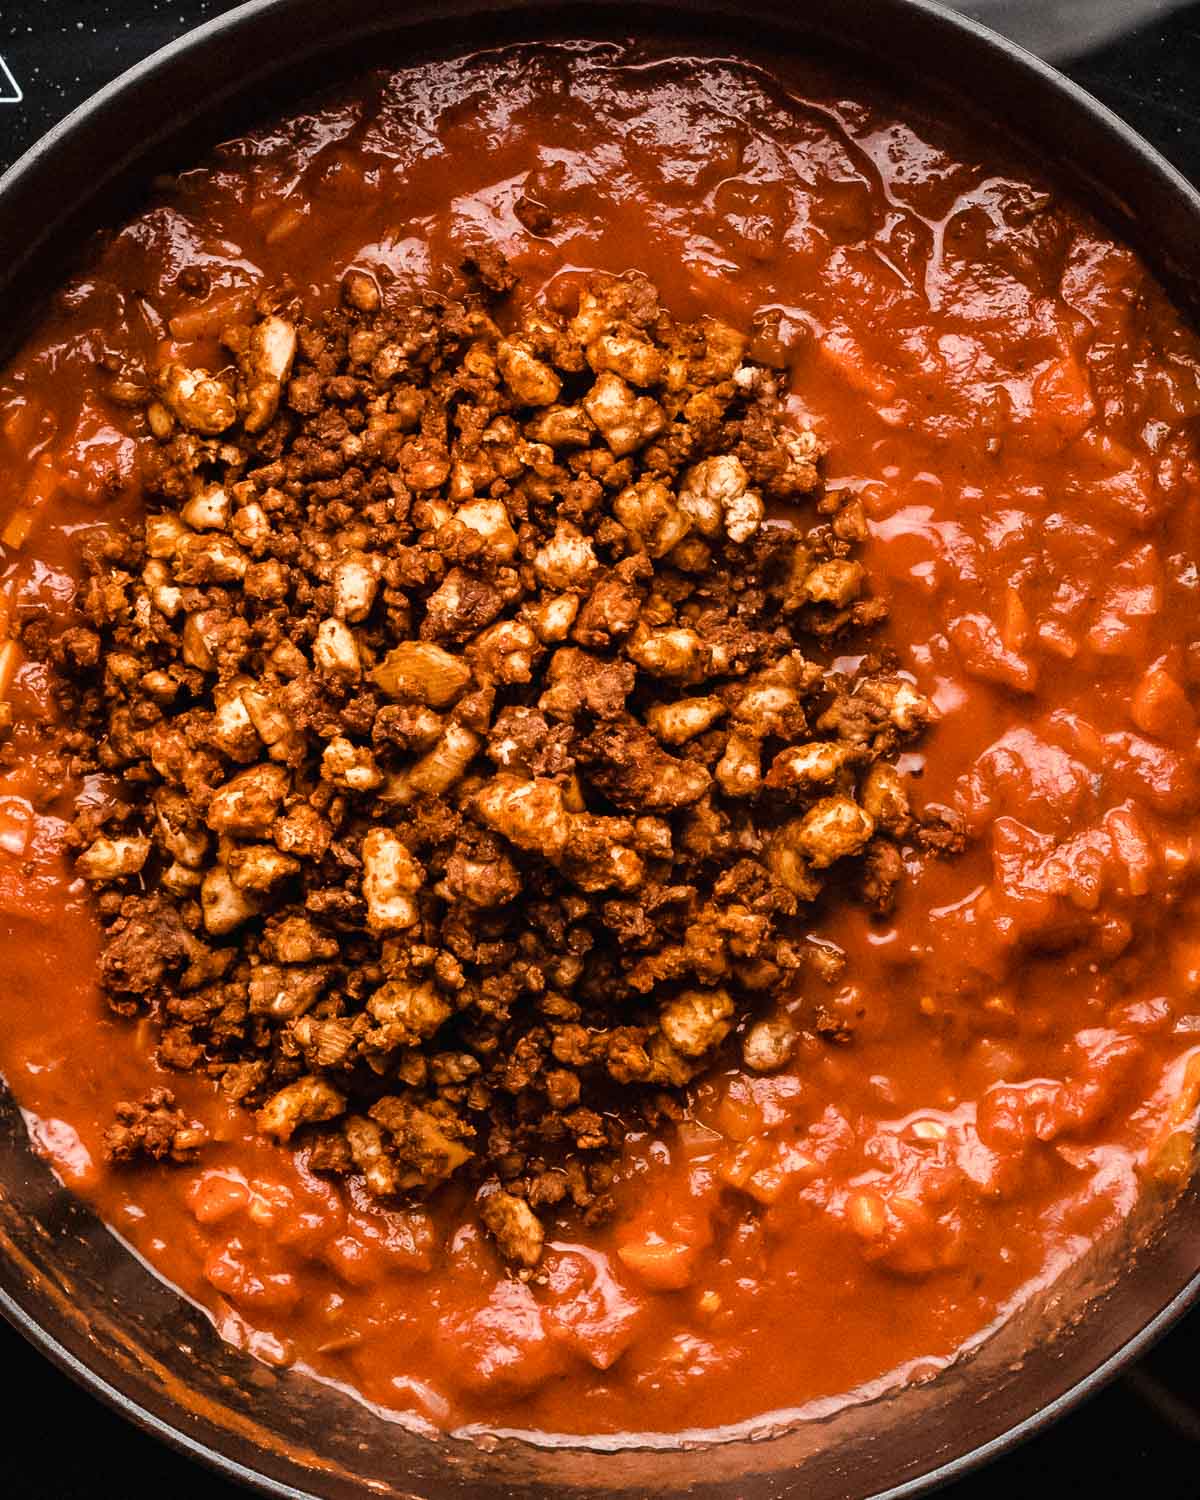 cooked tofu crumbles added to a tomato sauce in a saucepan.